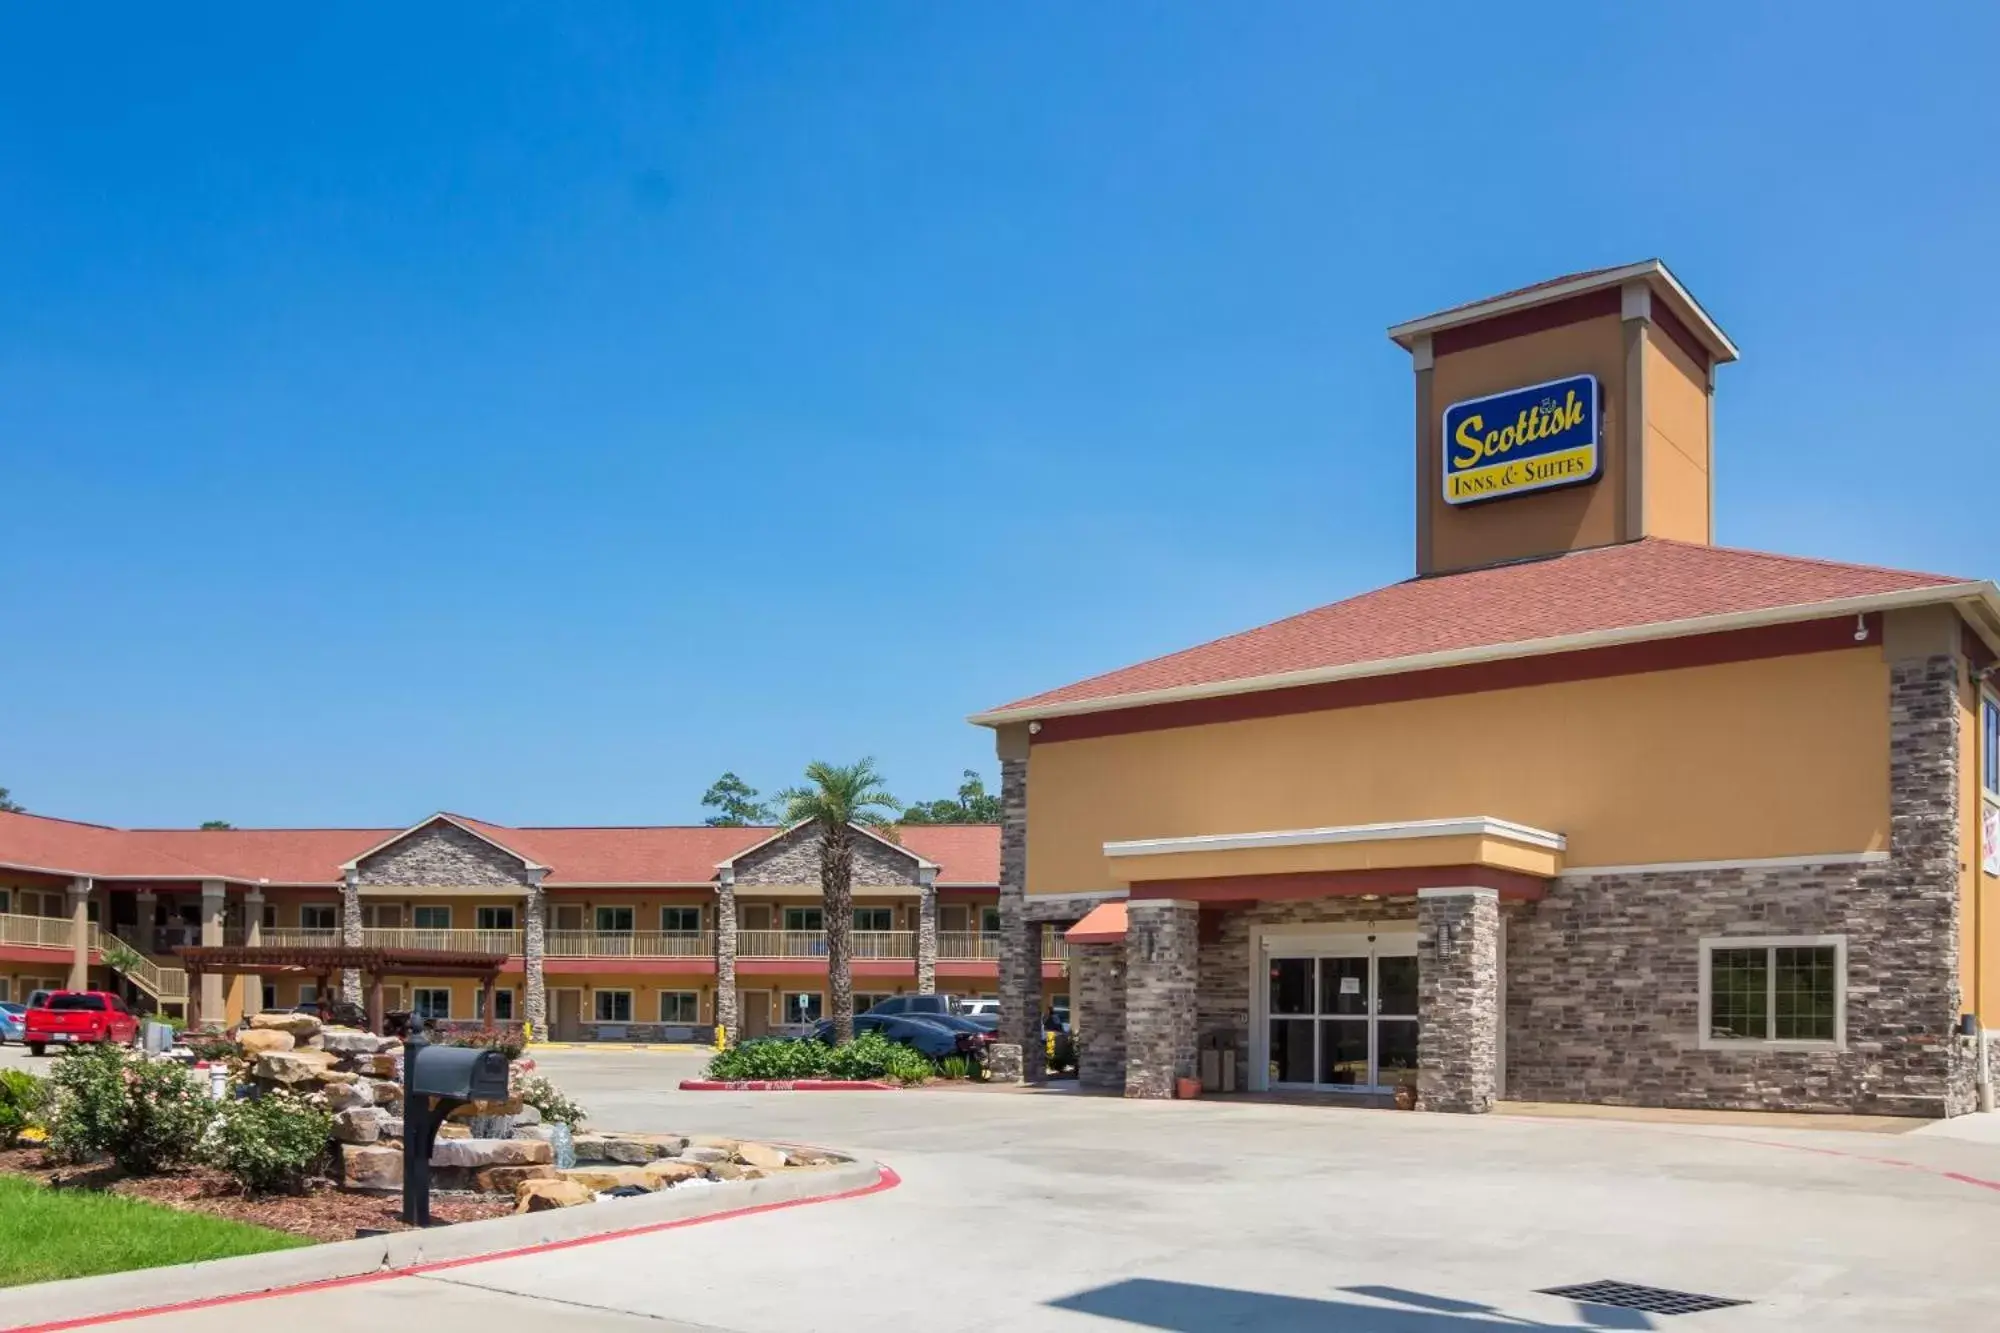 Property Building in Scottish Inns & Suites Spring - Houston North